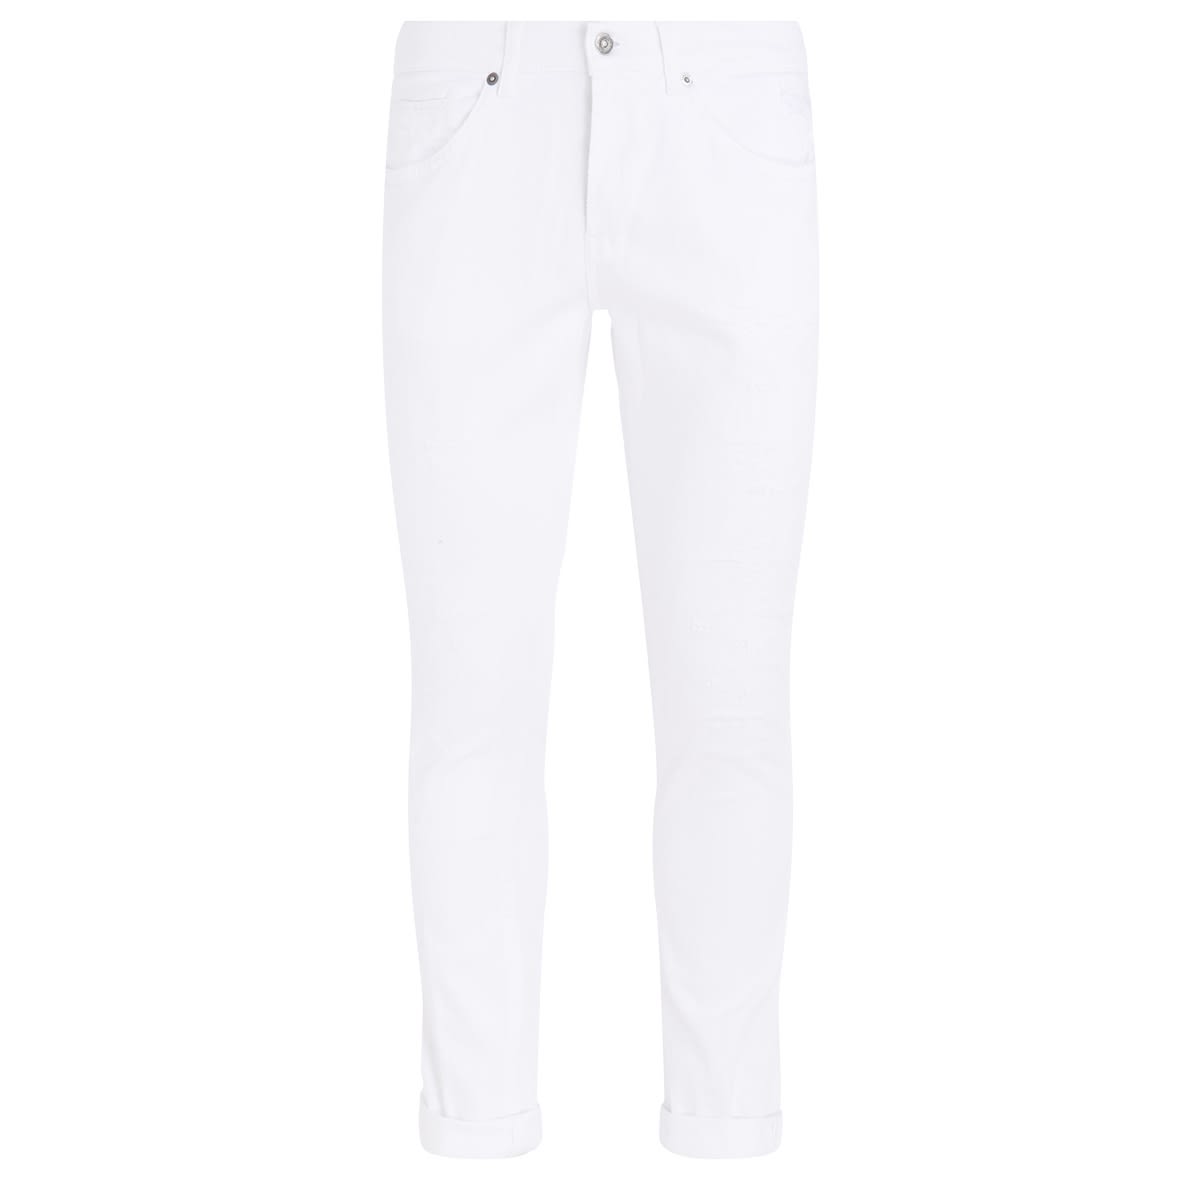 Dondup George White Jeans